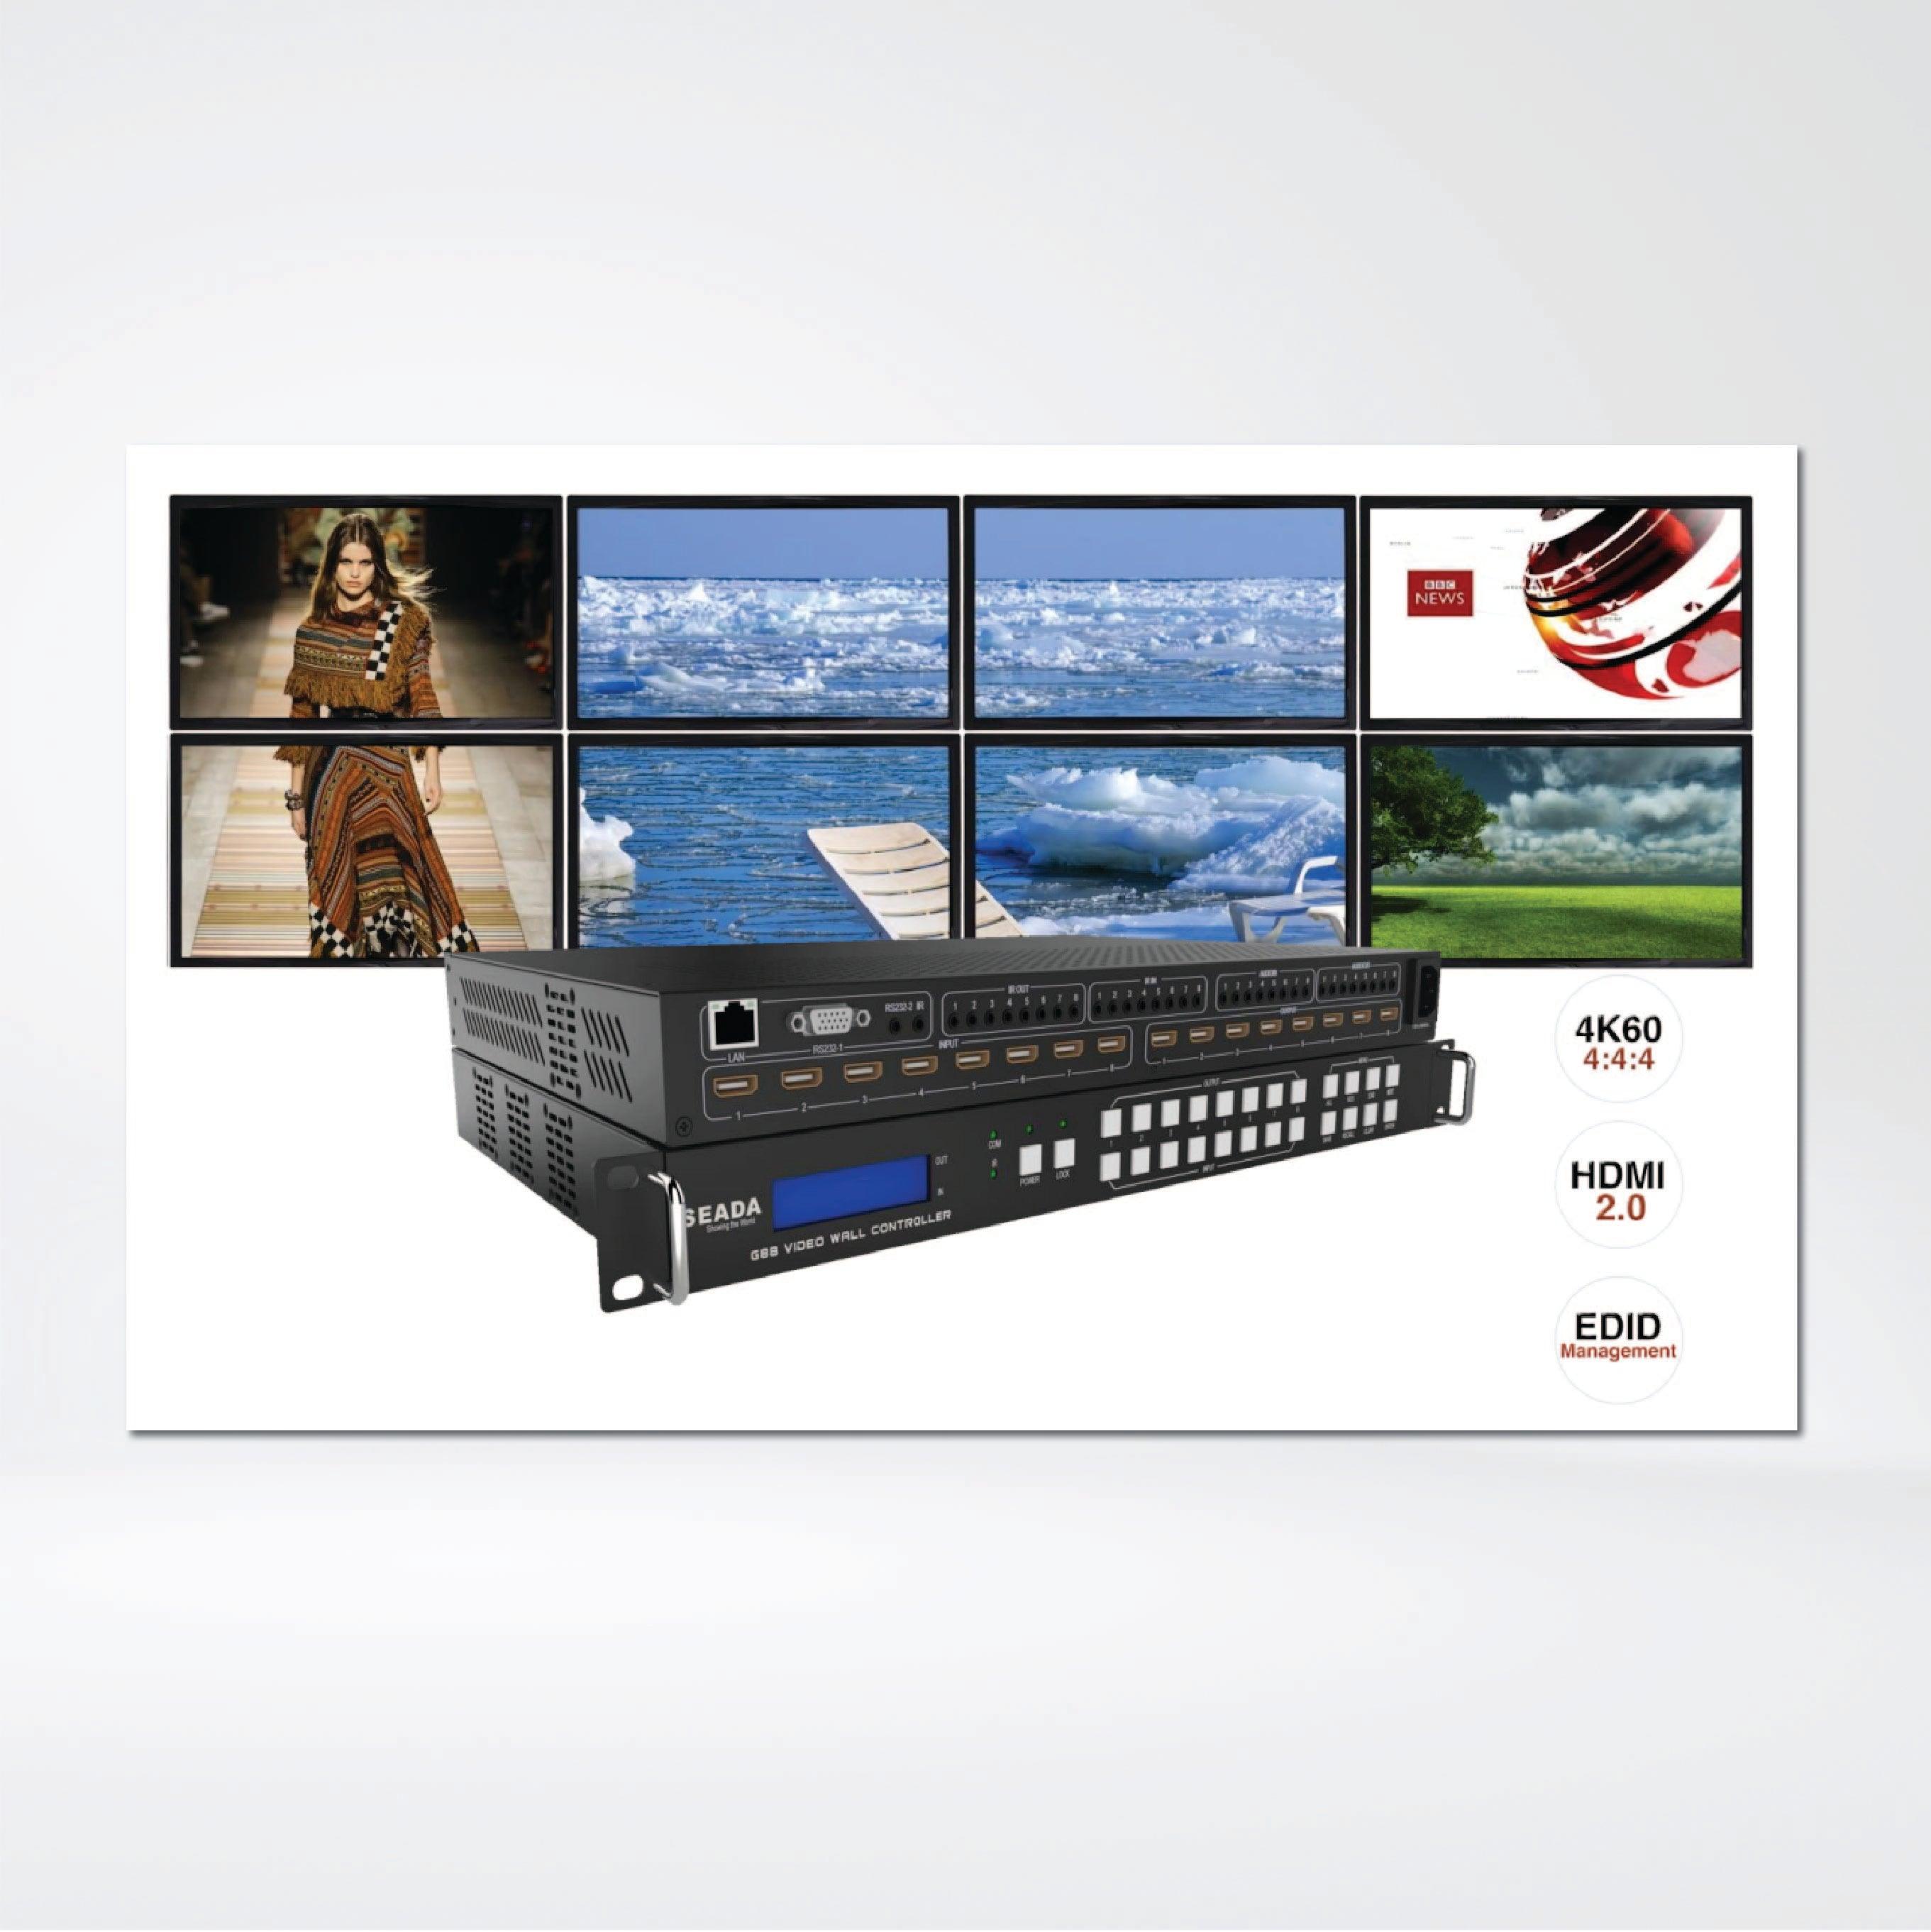 G88 Displays them on 8 different displays ,Up to 8 HDMI inputs ,Resolution up to 4K@60fps. - Riverplus